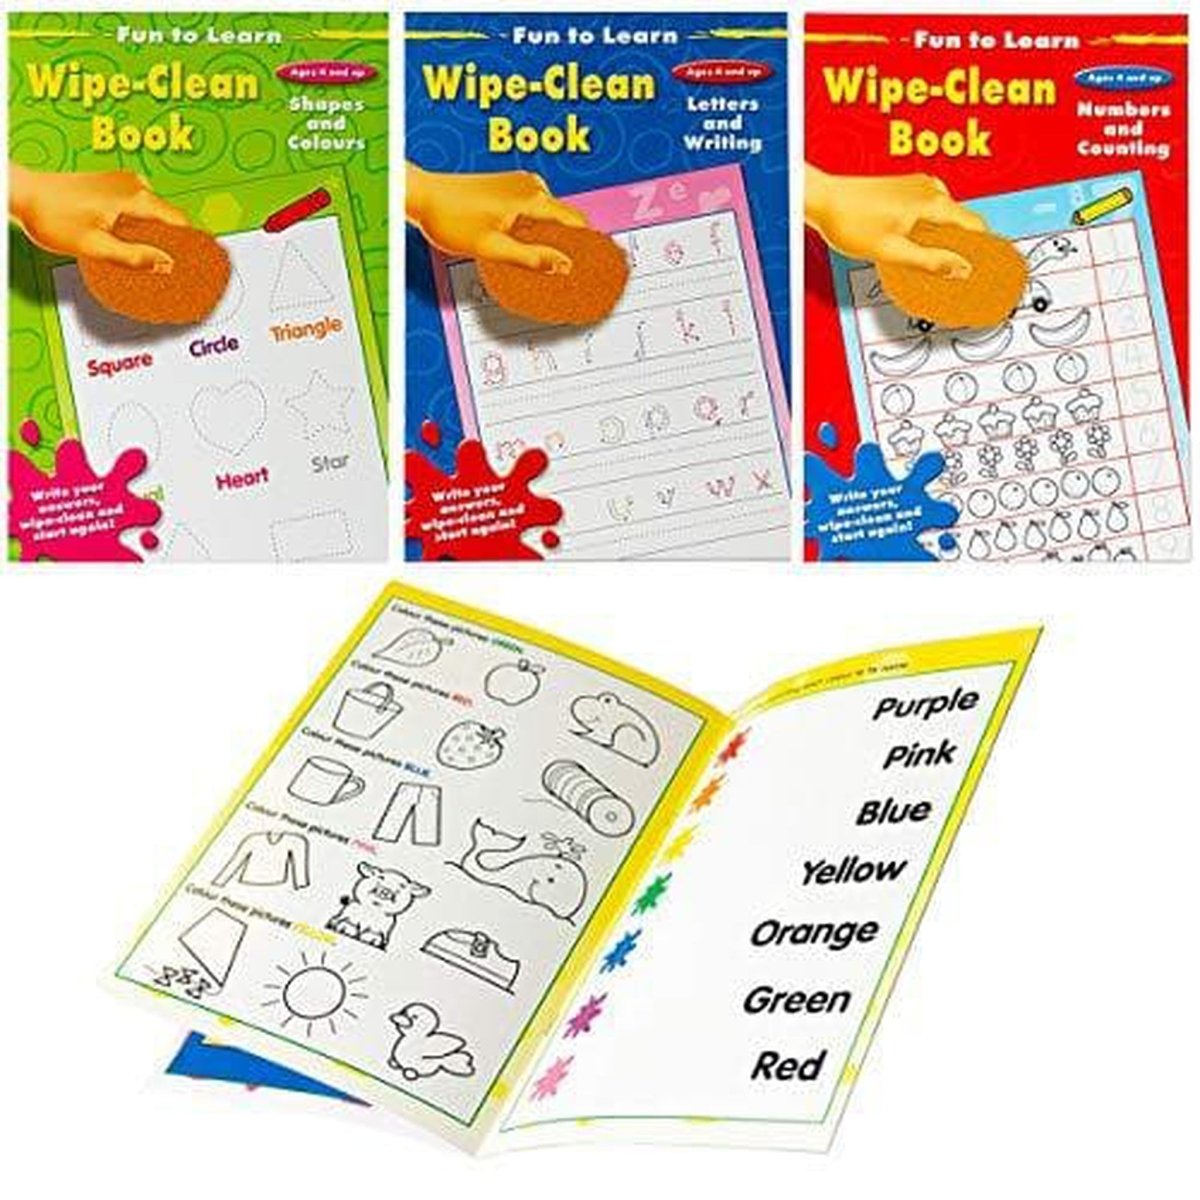 Fun to Learn Wipe-clean - Kids Party Craft